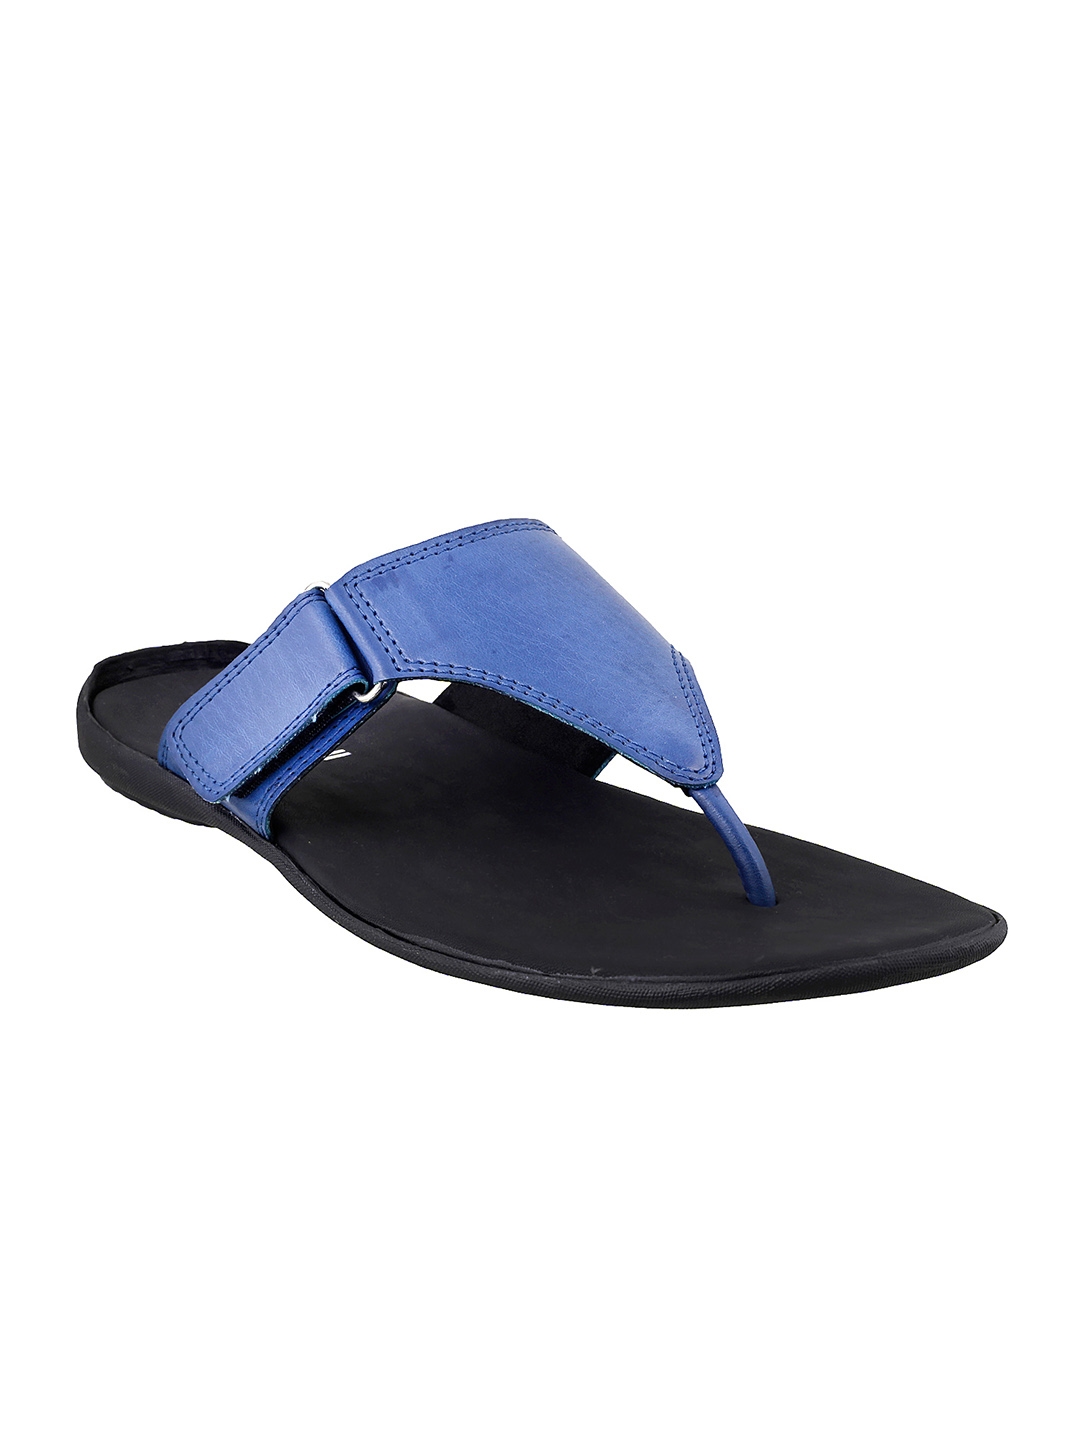 Mochi Men Black Synthetic Leather Sandals (18-1604) : Amazon.in: Fashion-hancorp34.com.vn